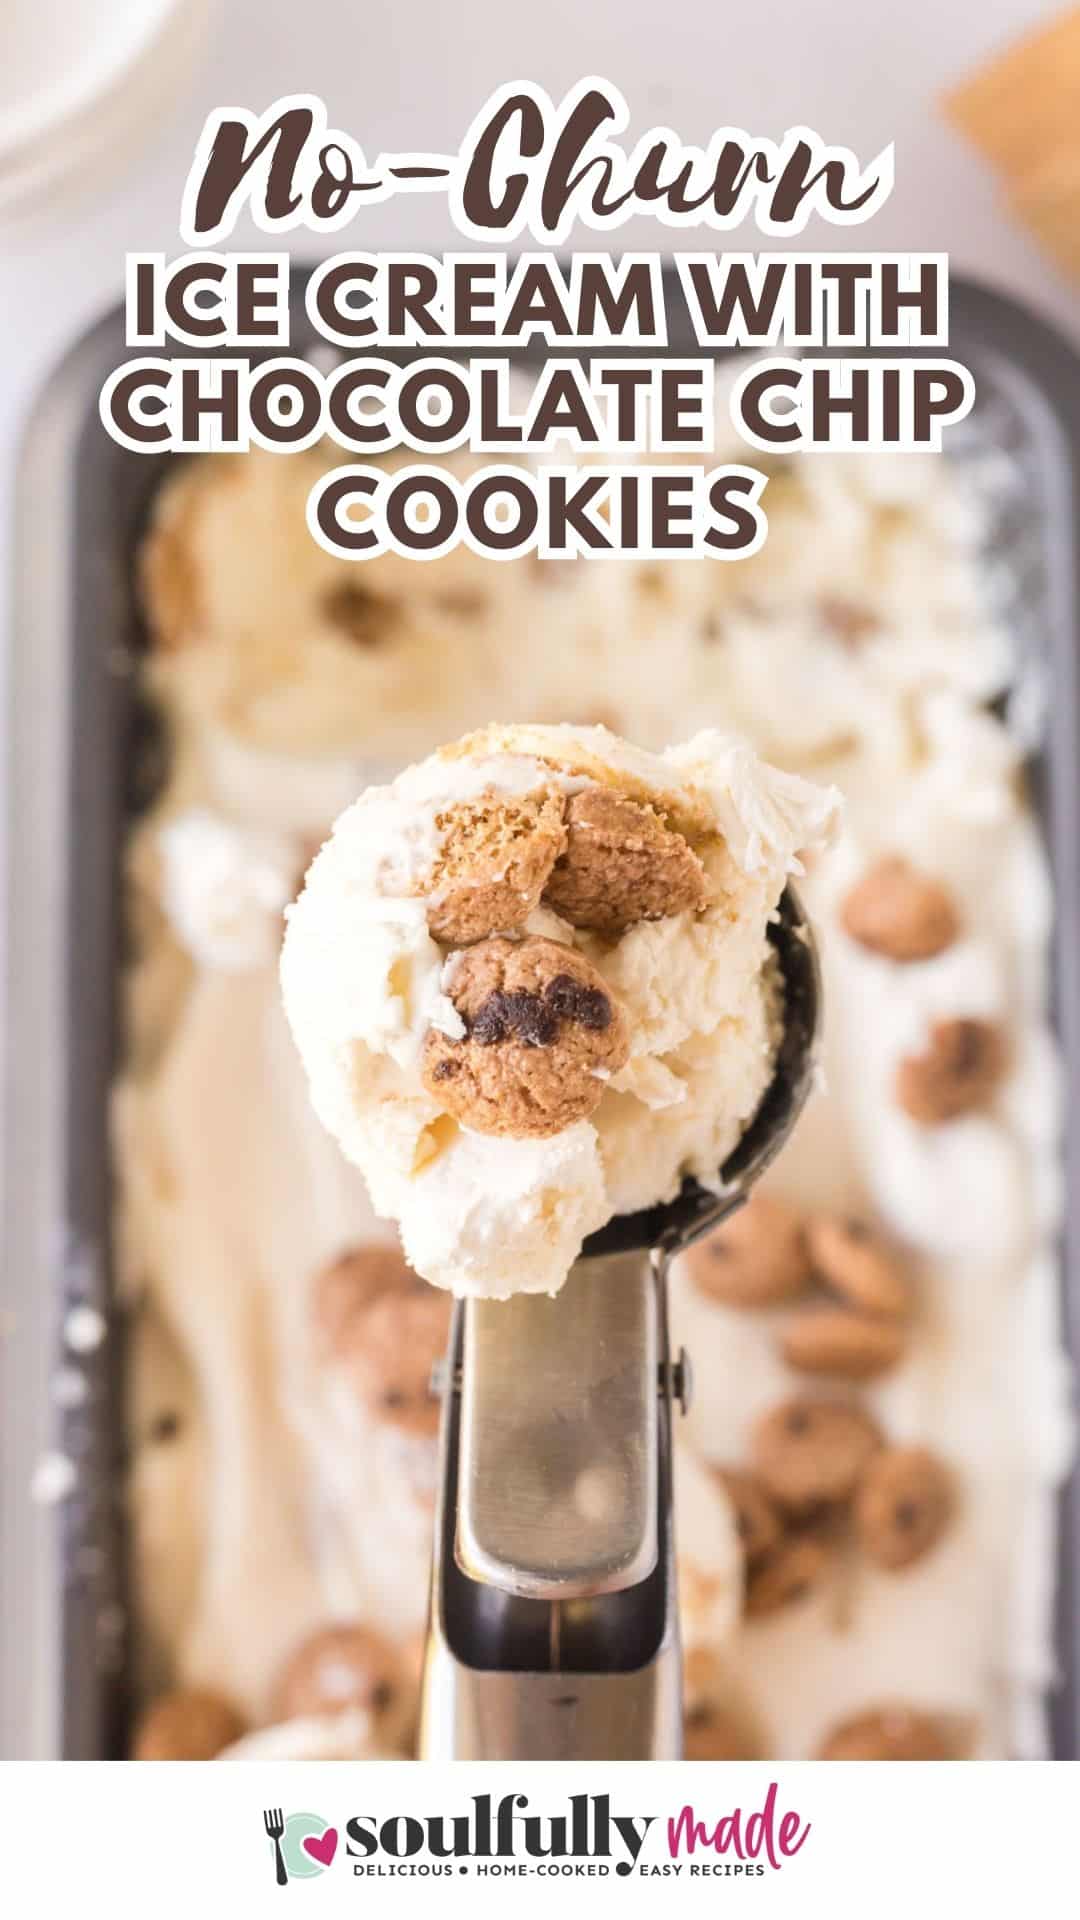 Cloe up image of a pan of ice cream with a scoop filled and topped with chocolate chip cookies.